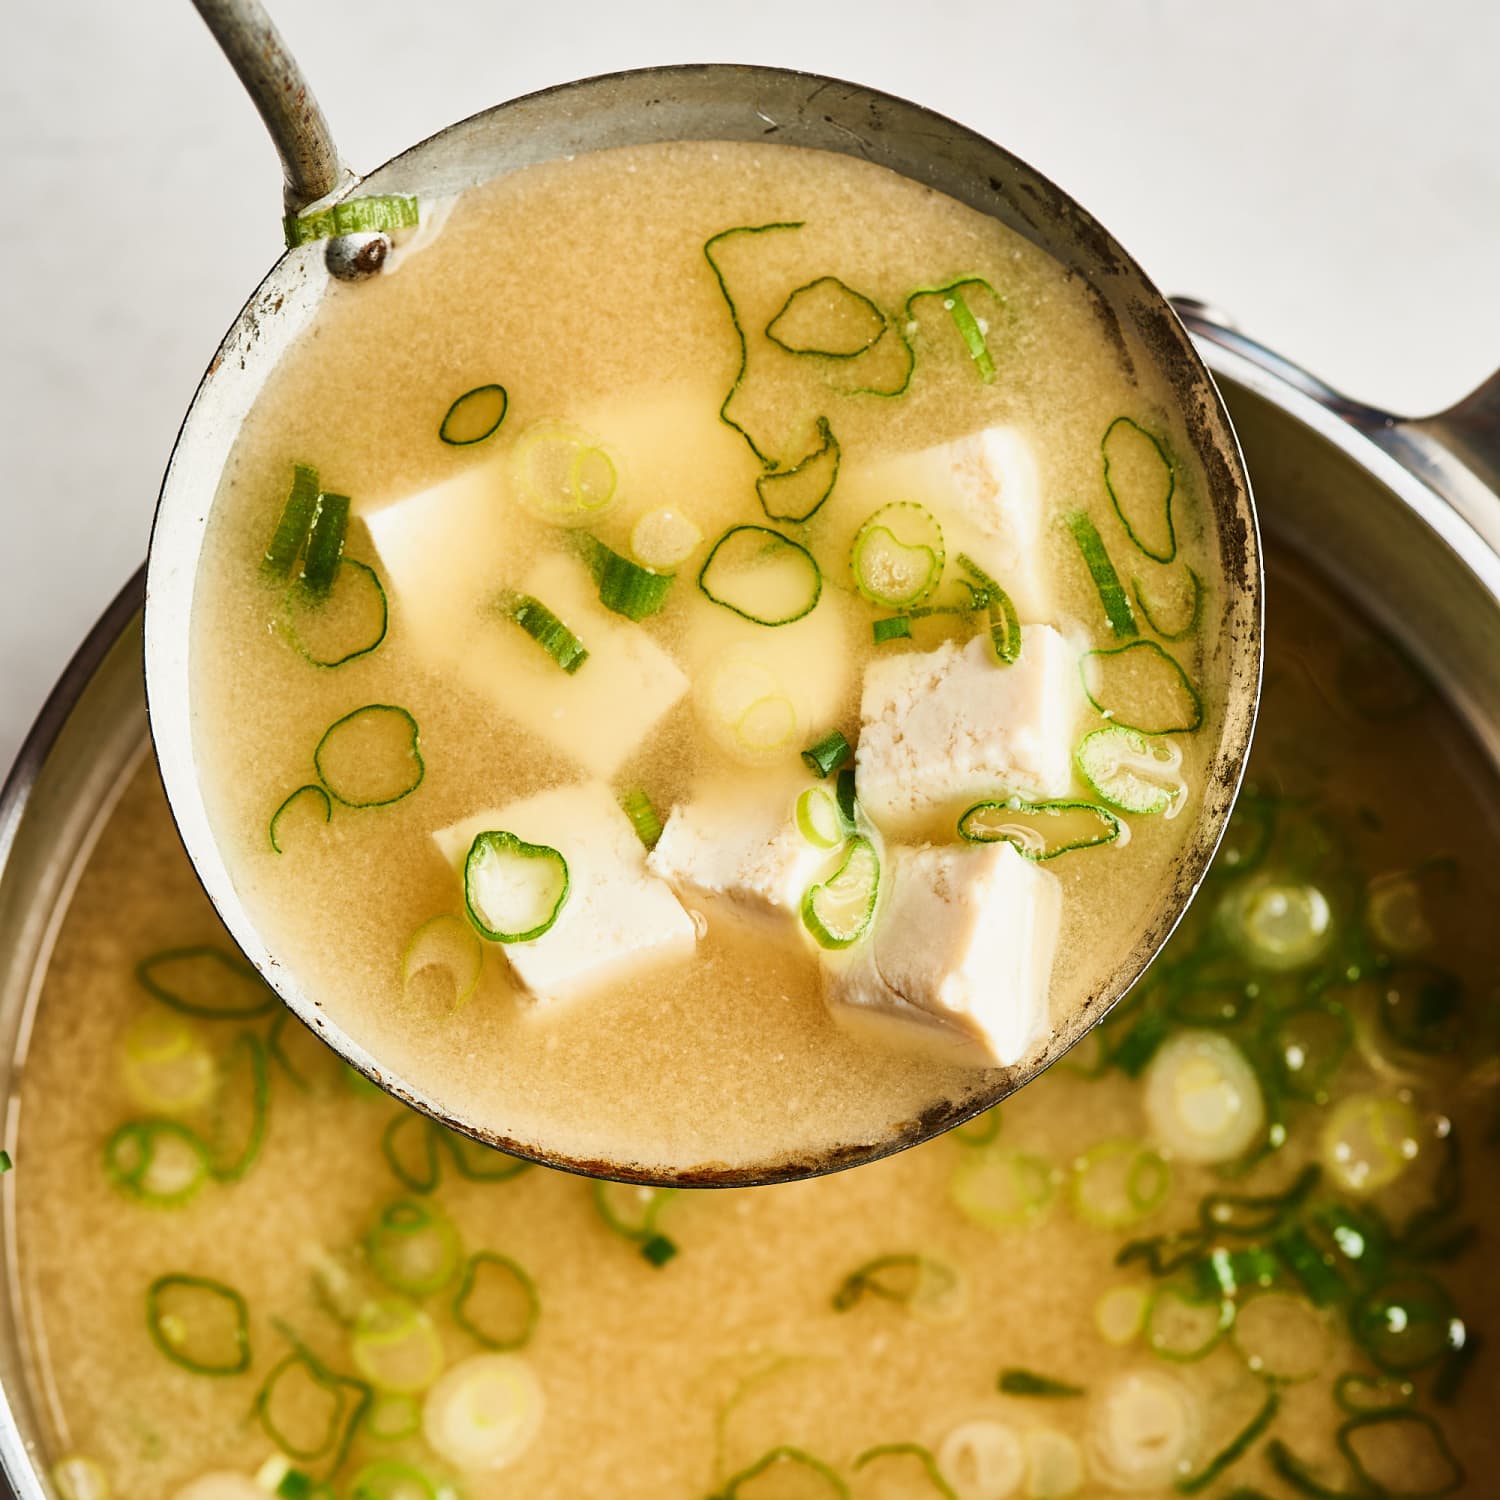 How To Make Easy &amp; Delicious Miso Soup at Home | Kitchn